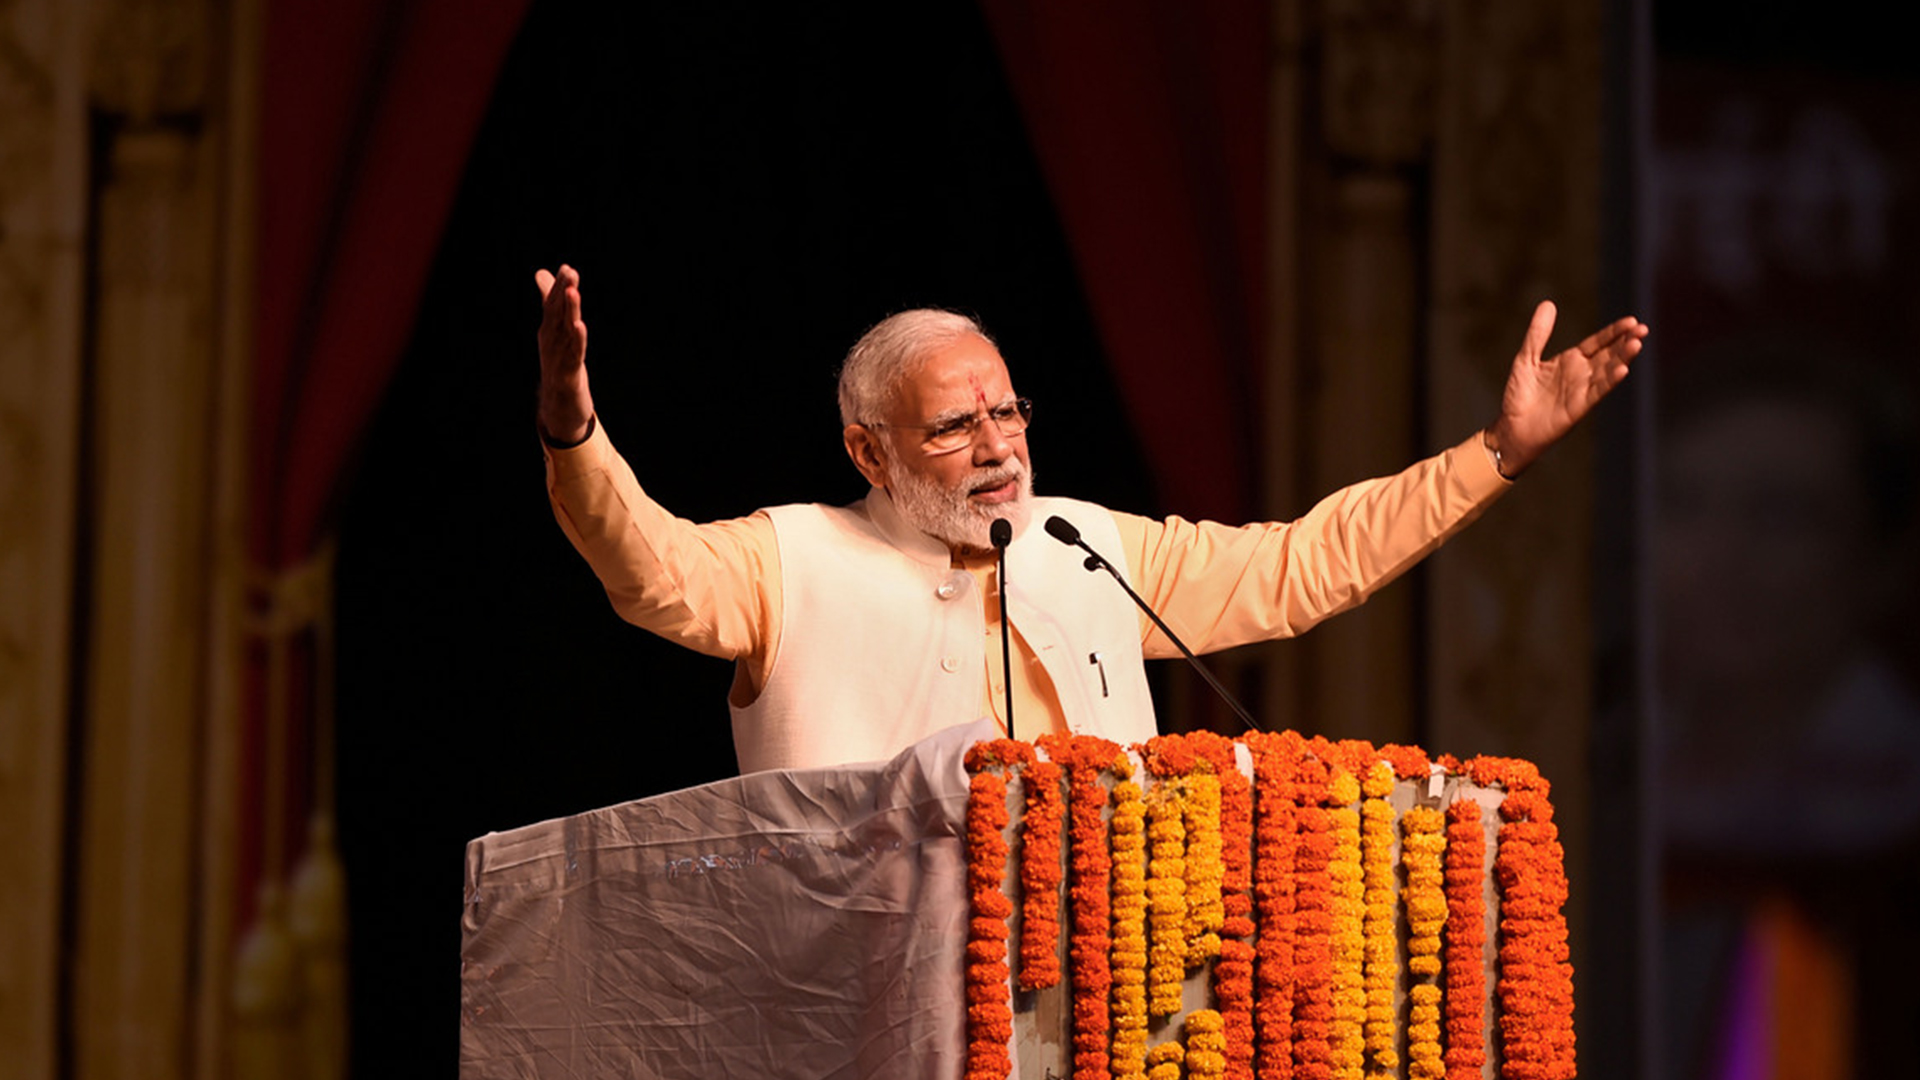 Modi became world's 'number one' followed politician